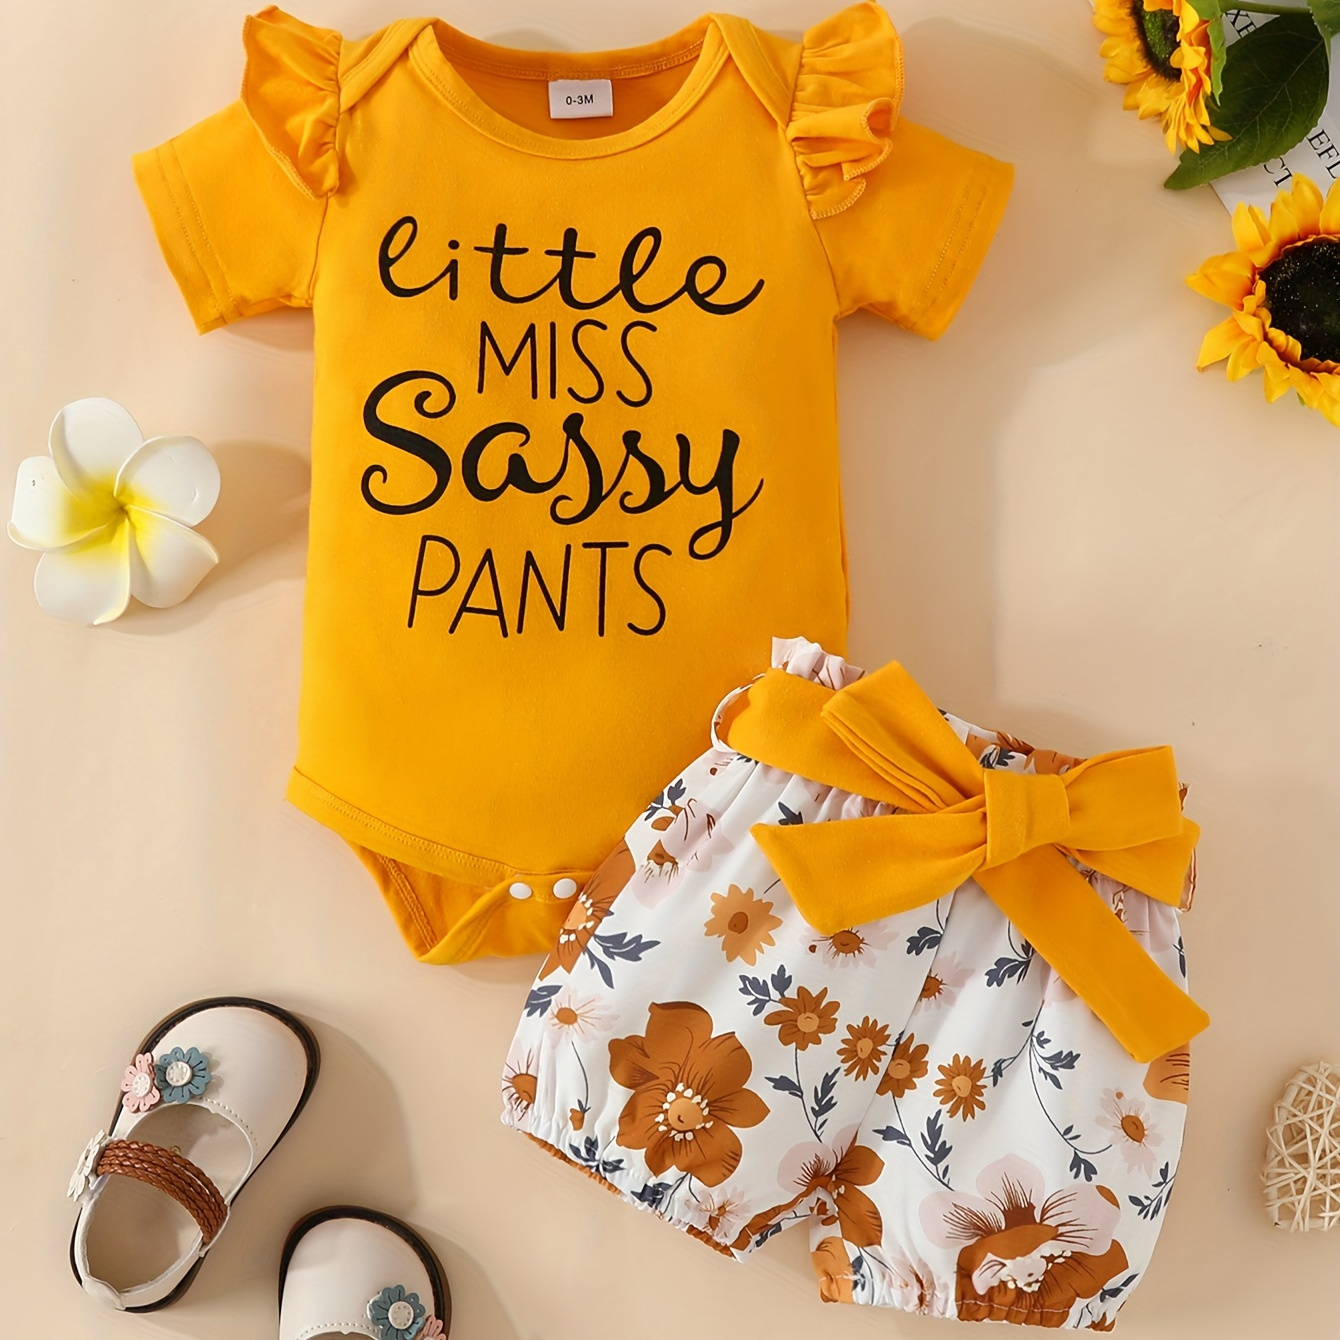 

Baby's "little Miss Sassy Pants" Print 2pcs Summer Outfit, Ruffle Decor Triangle Onesie & Flower Pattern Shorts Set, Toddler & Infant Girl's Clothes